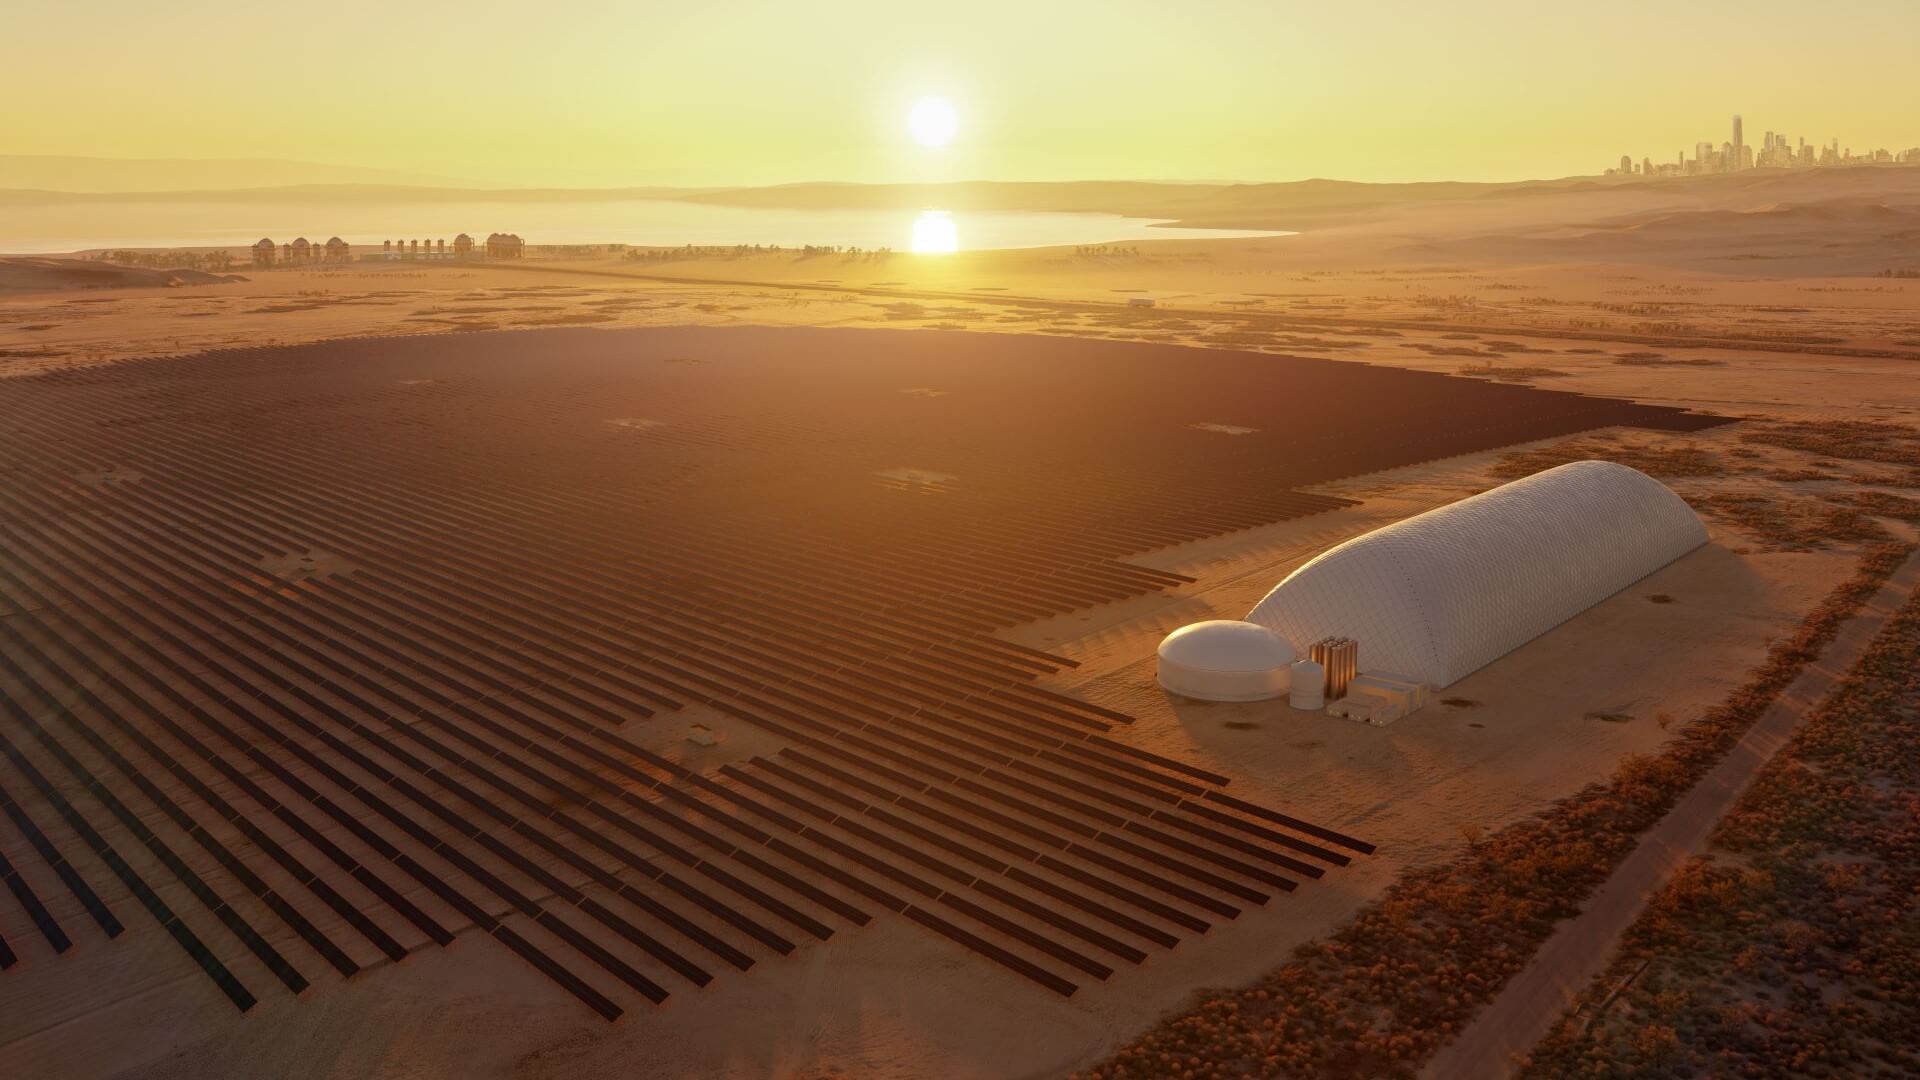 Artist impression of the Energy Dome and solar farm